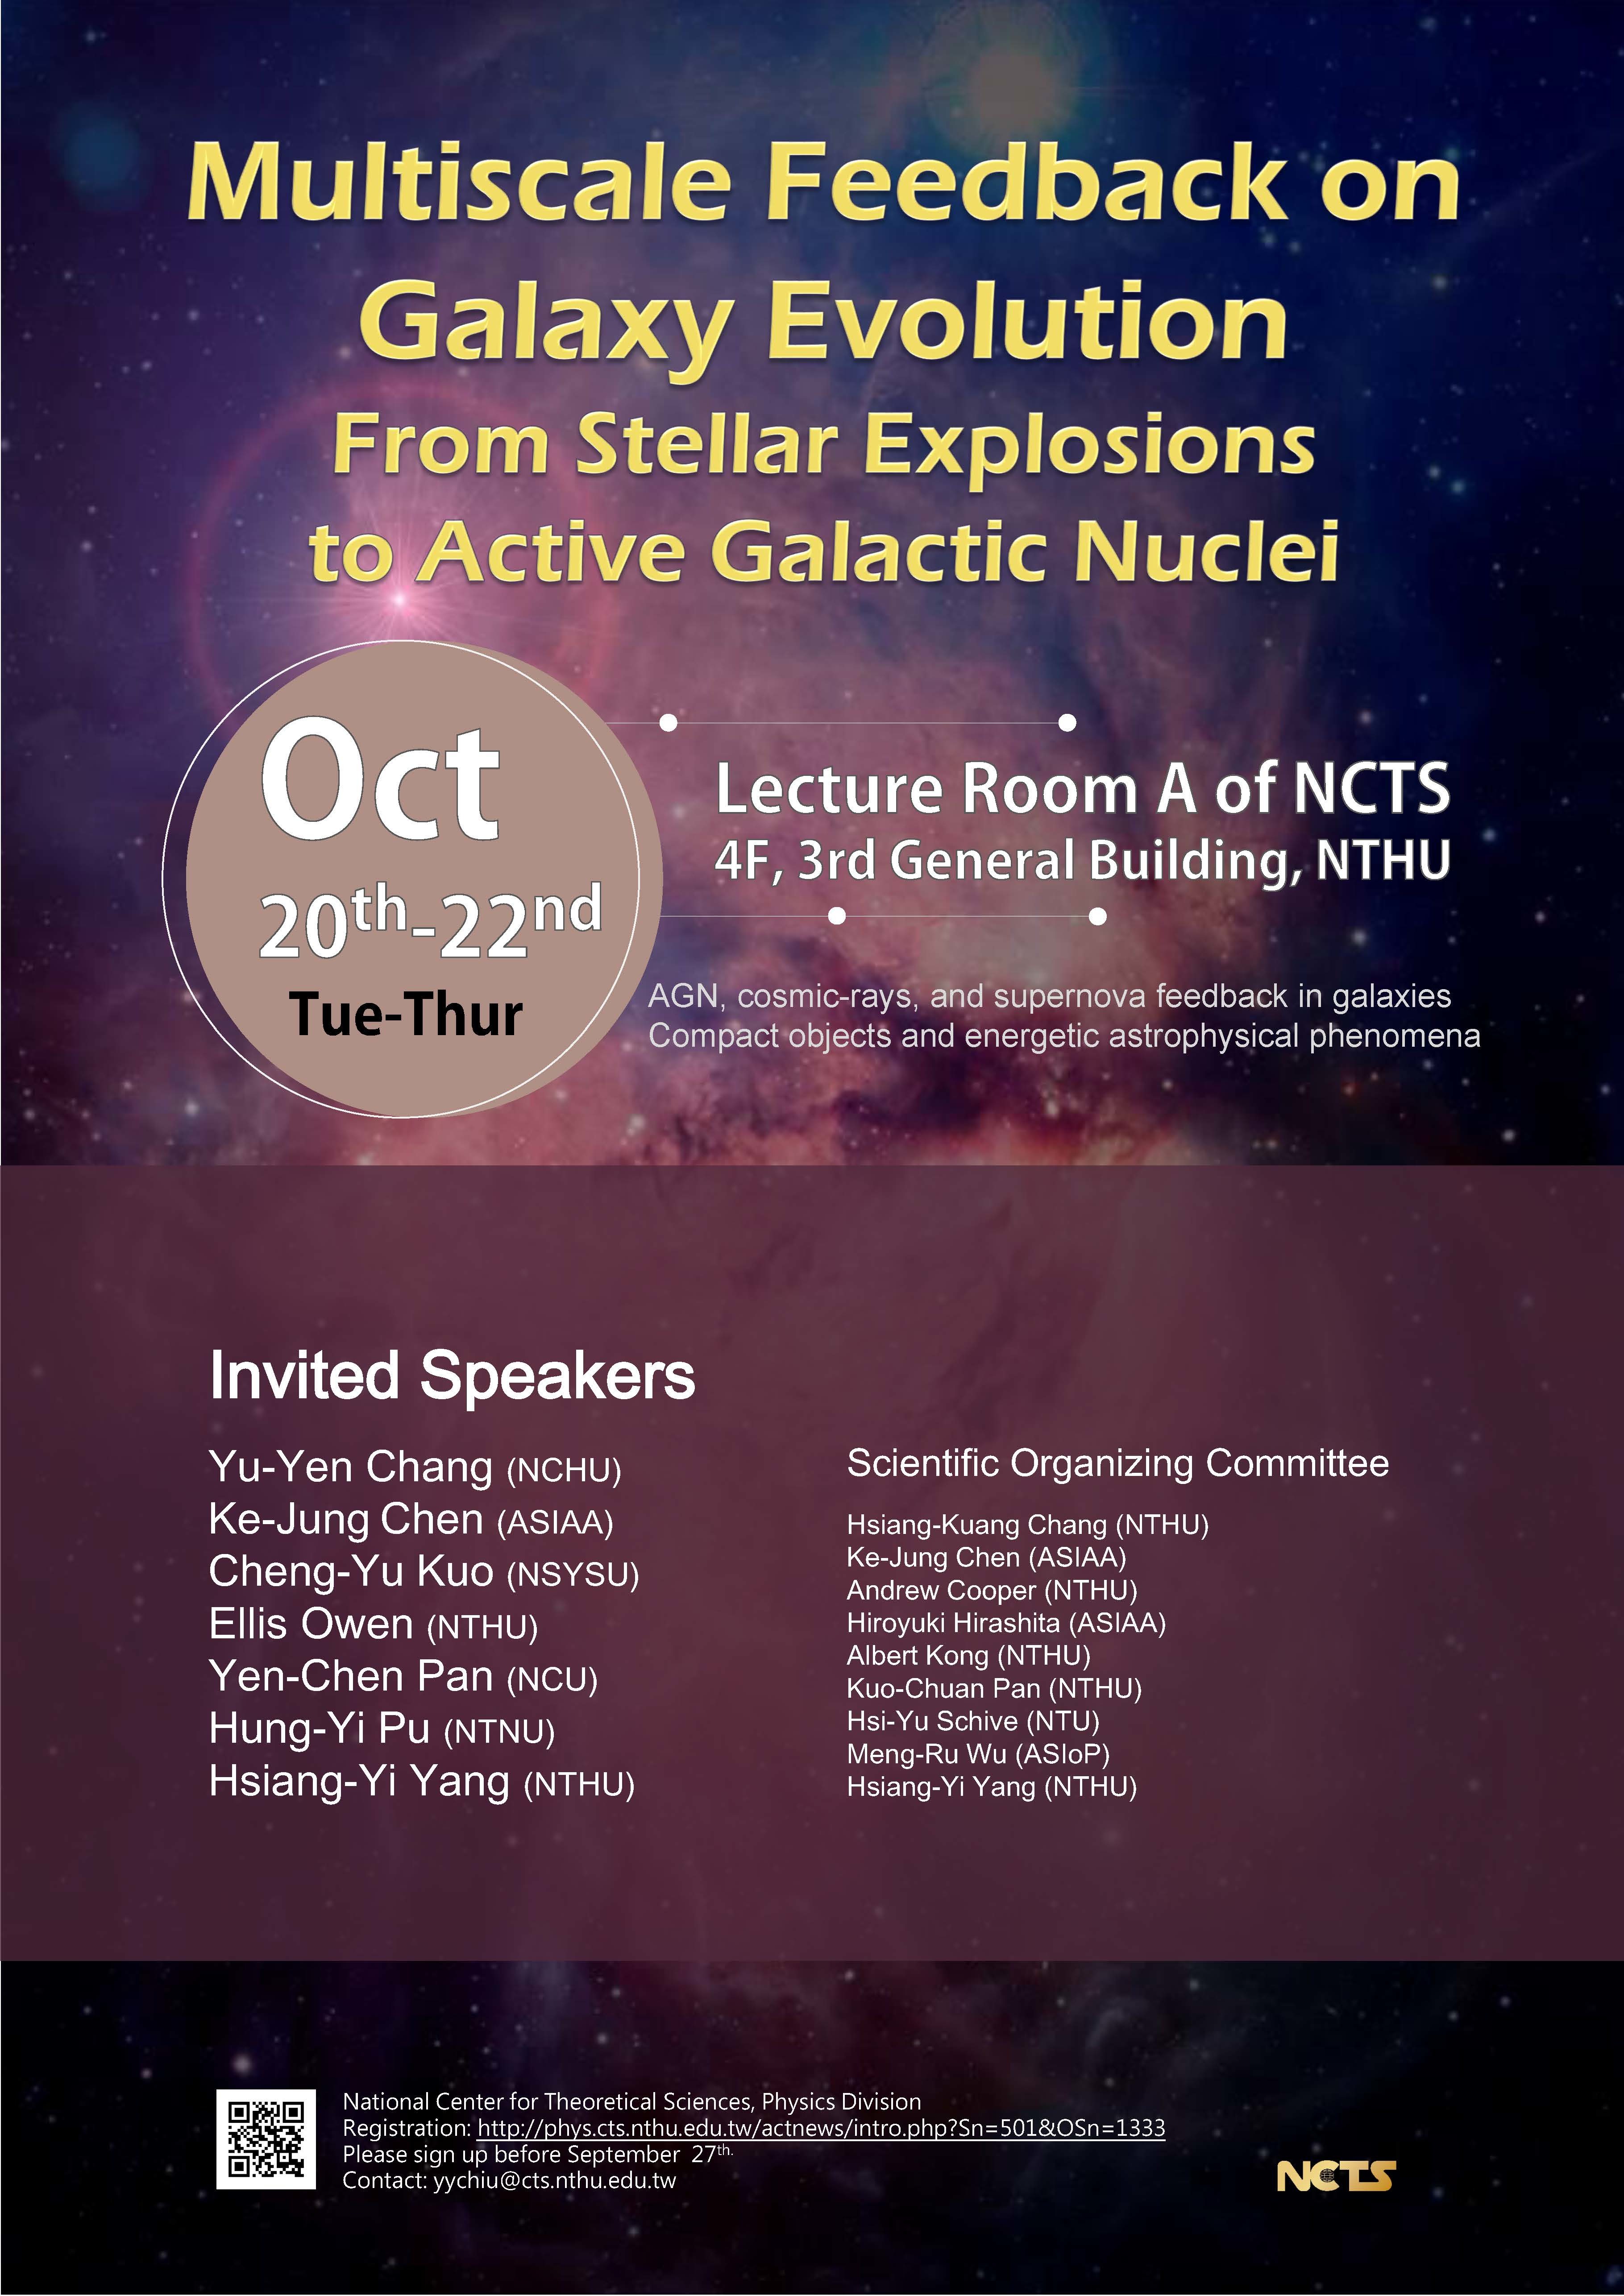 Multiscale Feedback on Galaxy Evolution: From Stellar Explosions to Active Galactic Nuclei